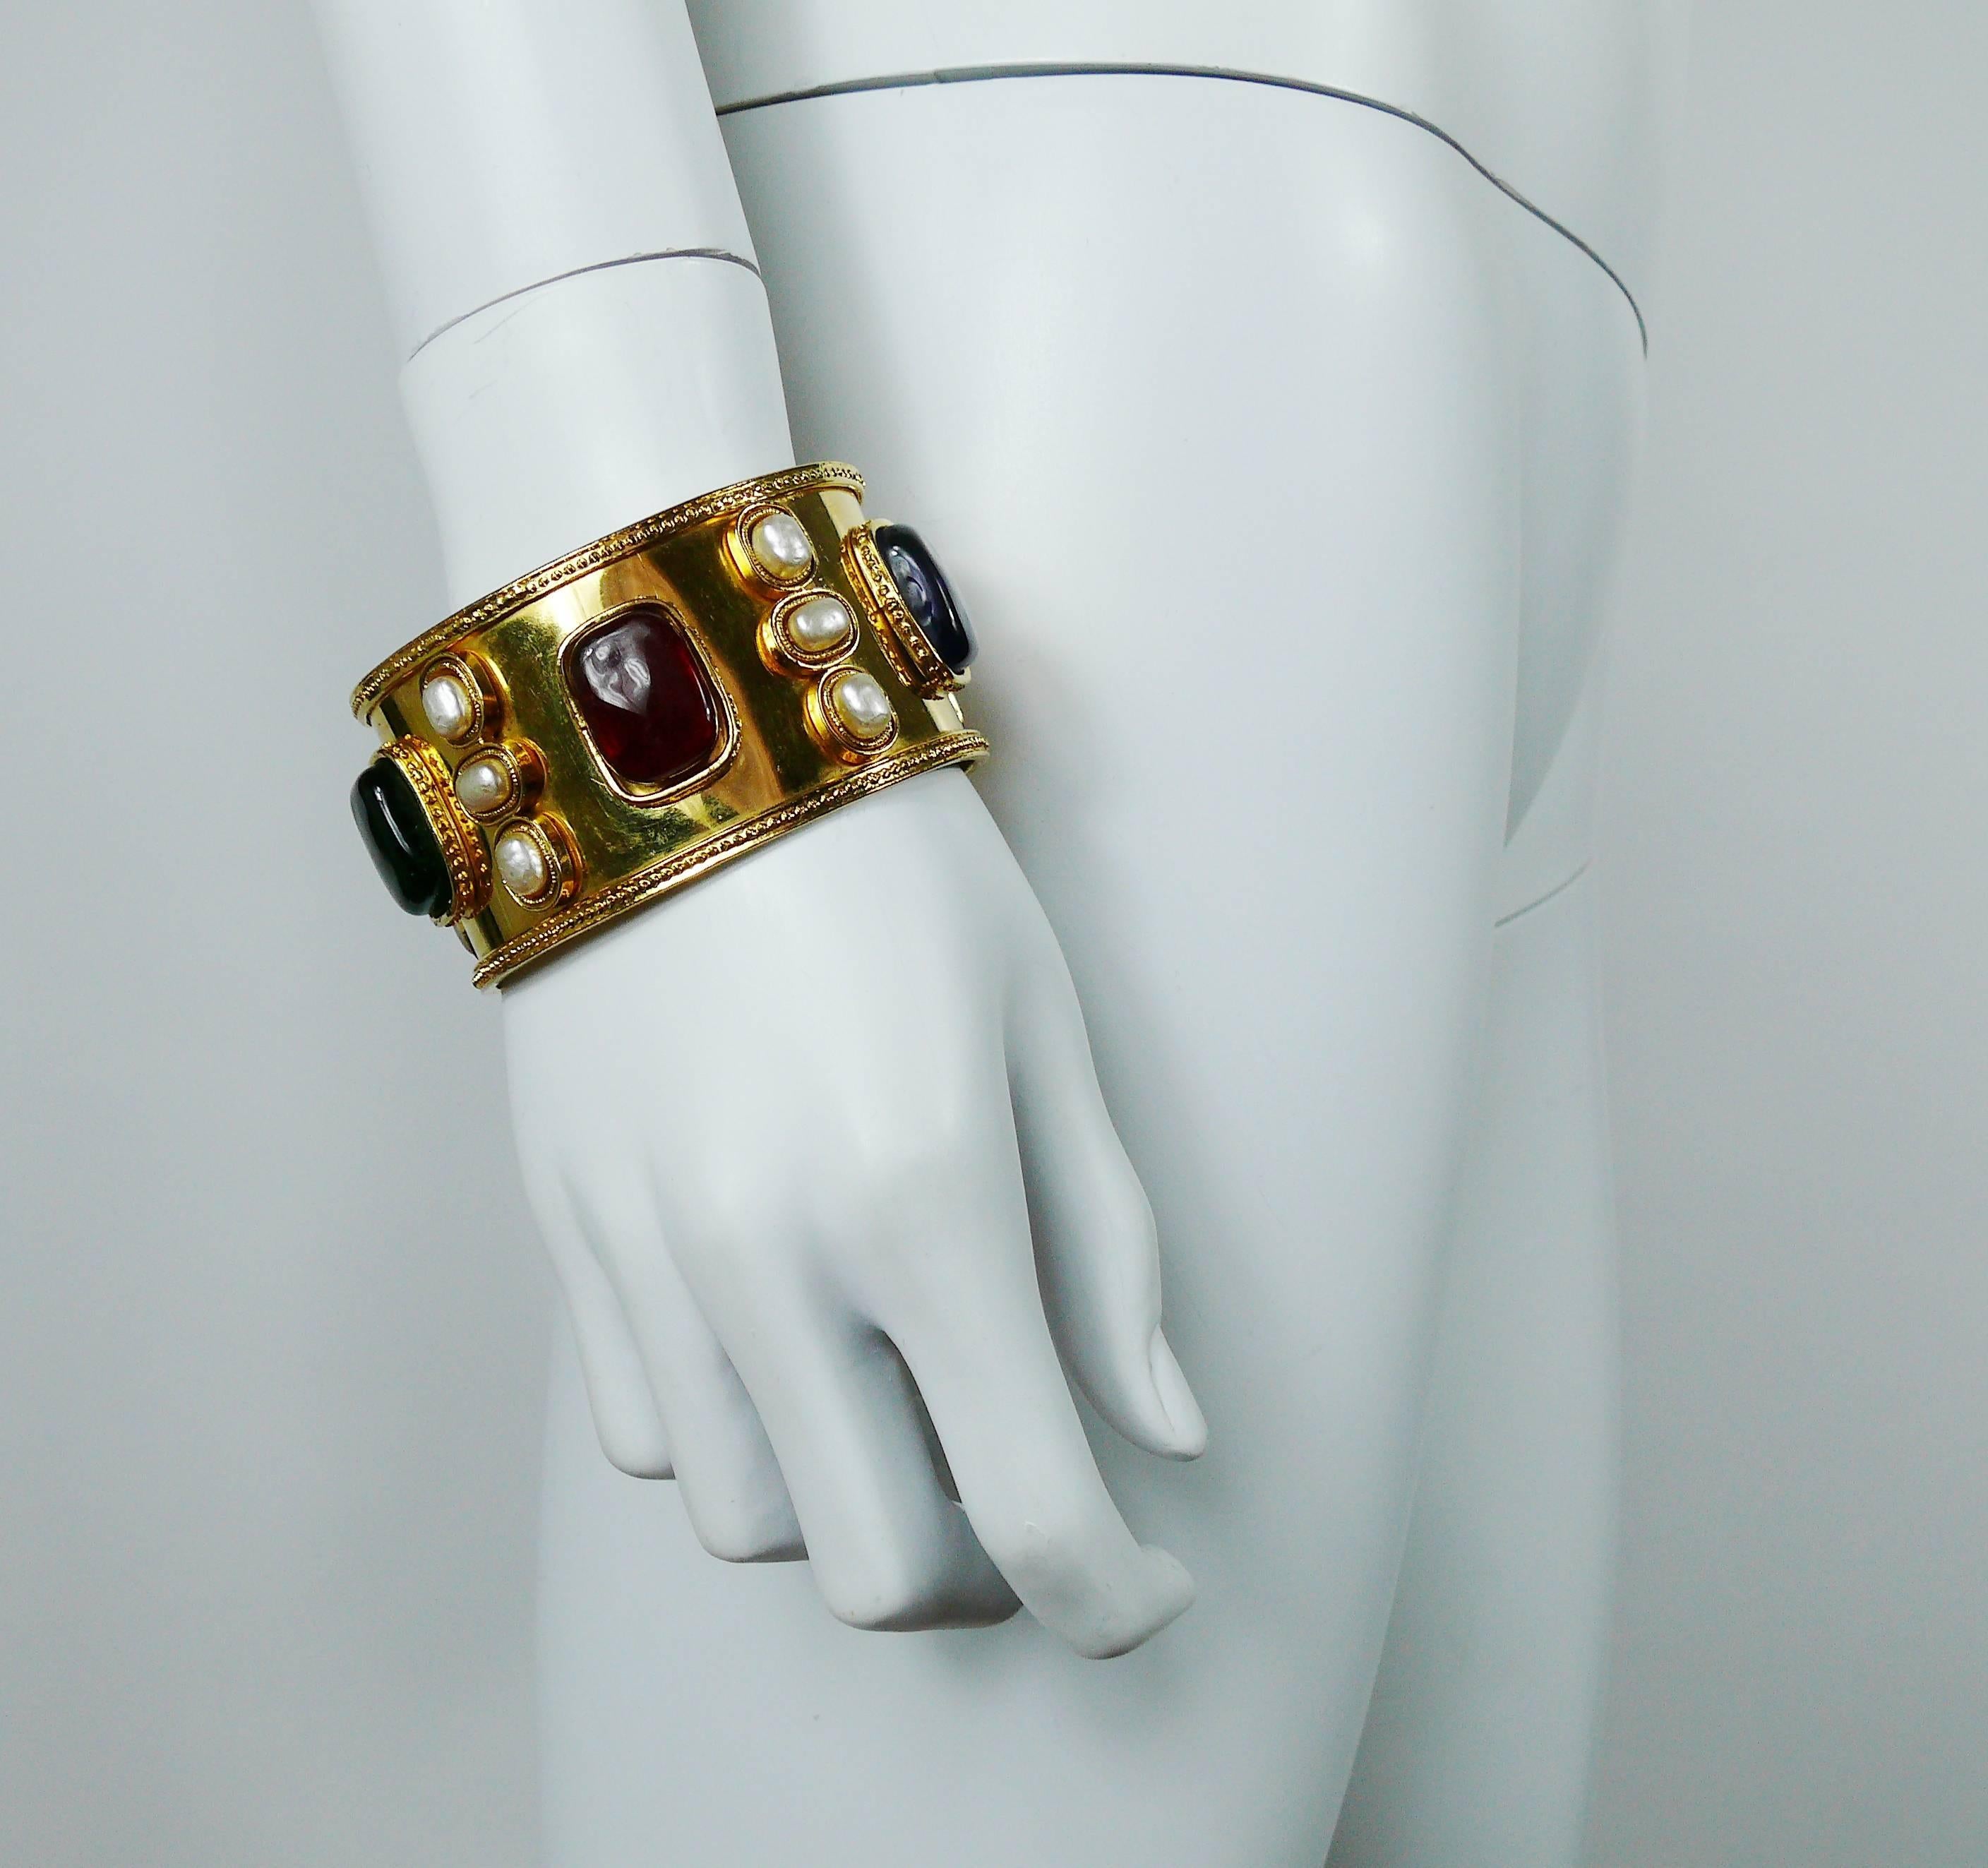 CHANEL by KARL LAGERFELD vintage Byzantine inspired gold tone cuff bracelet embellished with multicolored (green, red and blue) MAISON GRIPOIX faux gem glass cabochons and faux pearls.

Marked CHANEL 2 5 Made in France.

Collection N°25 (Year :